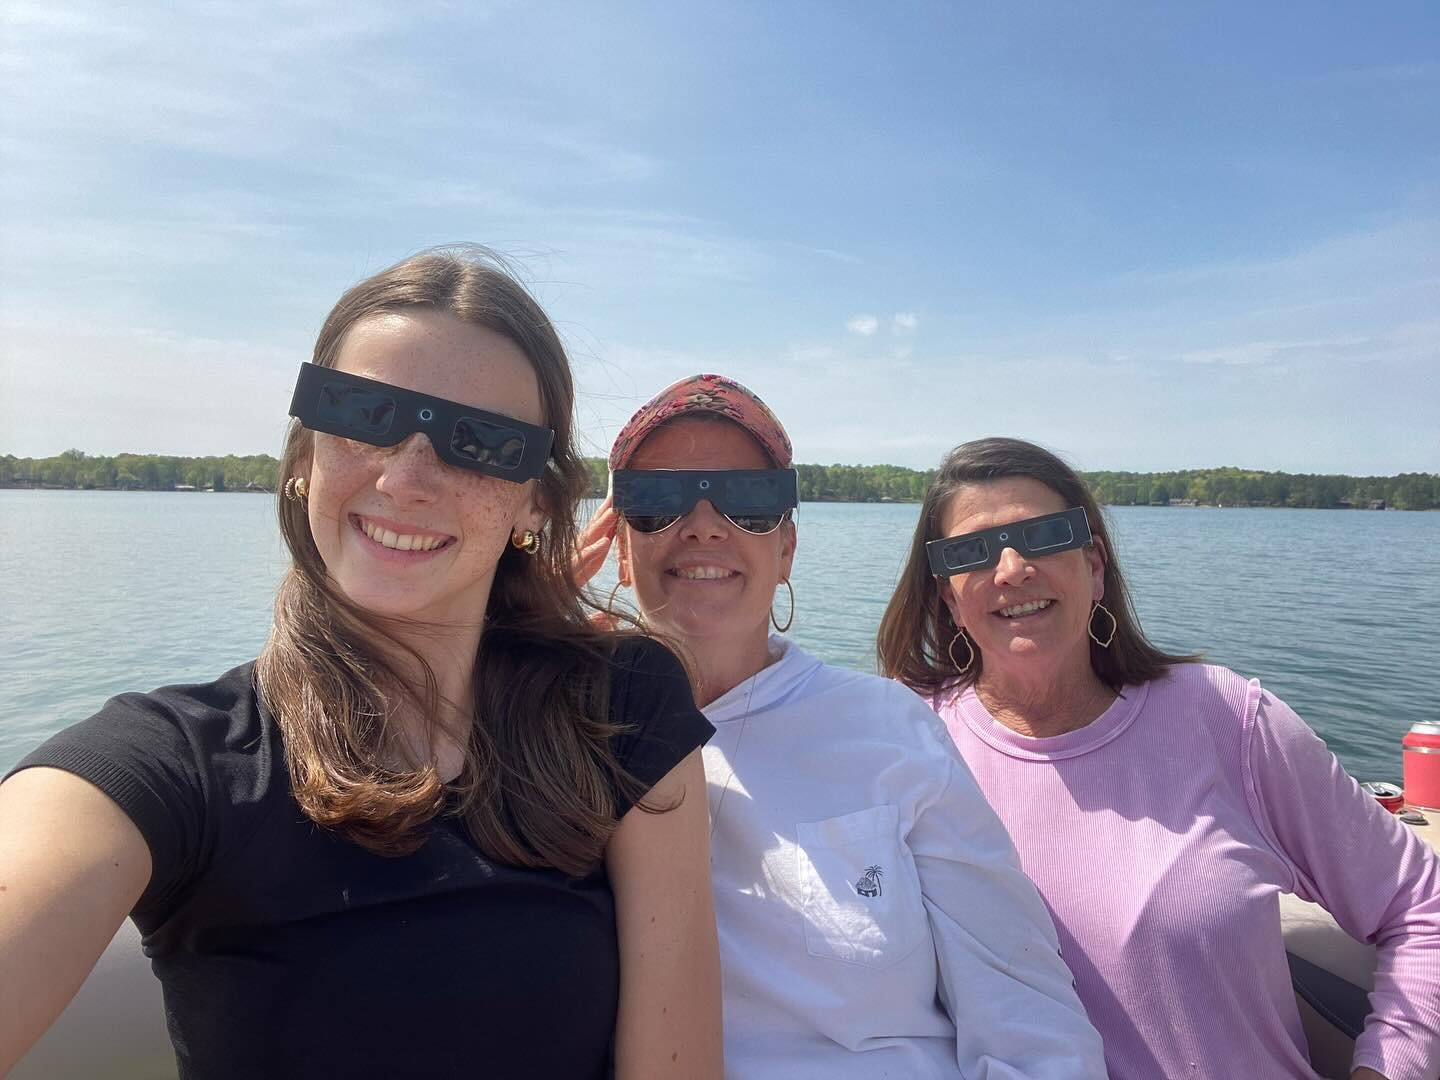 Lake Martin was the best place to watch the eclipse!! 🌙 🌕 🌖 💦
.
@avacfrank25 @staceyb90 @steelemarketing